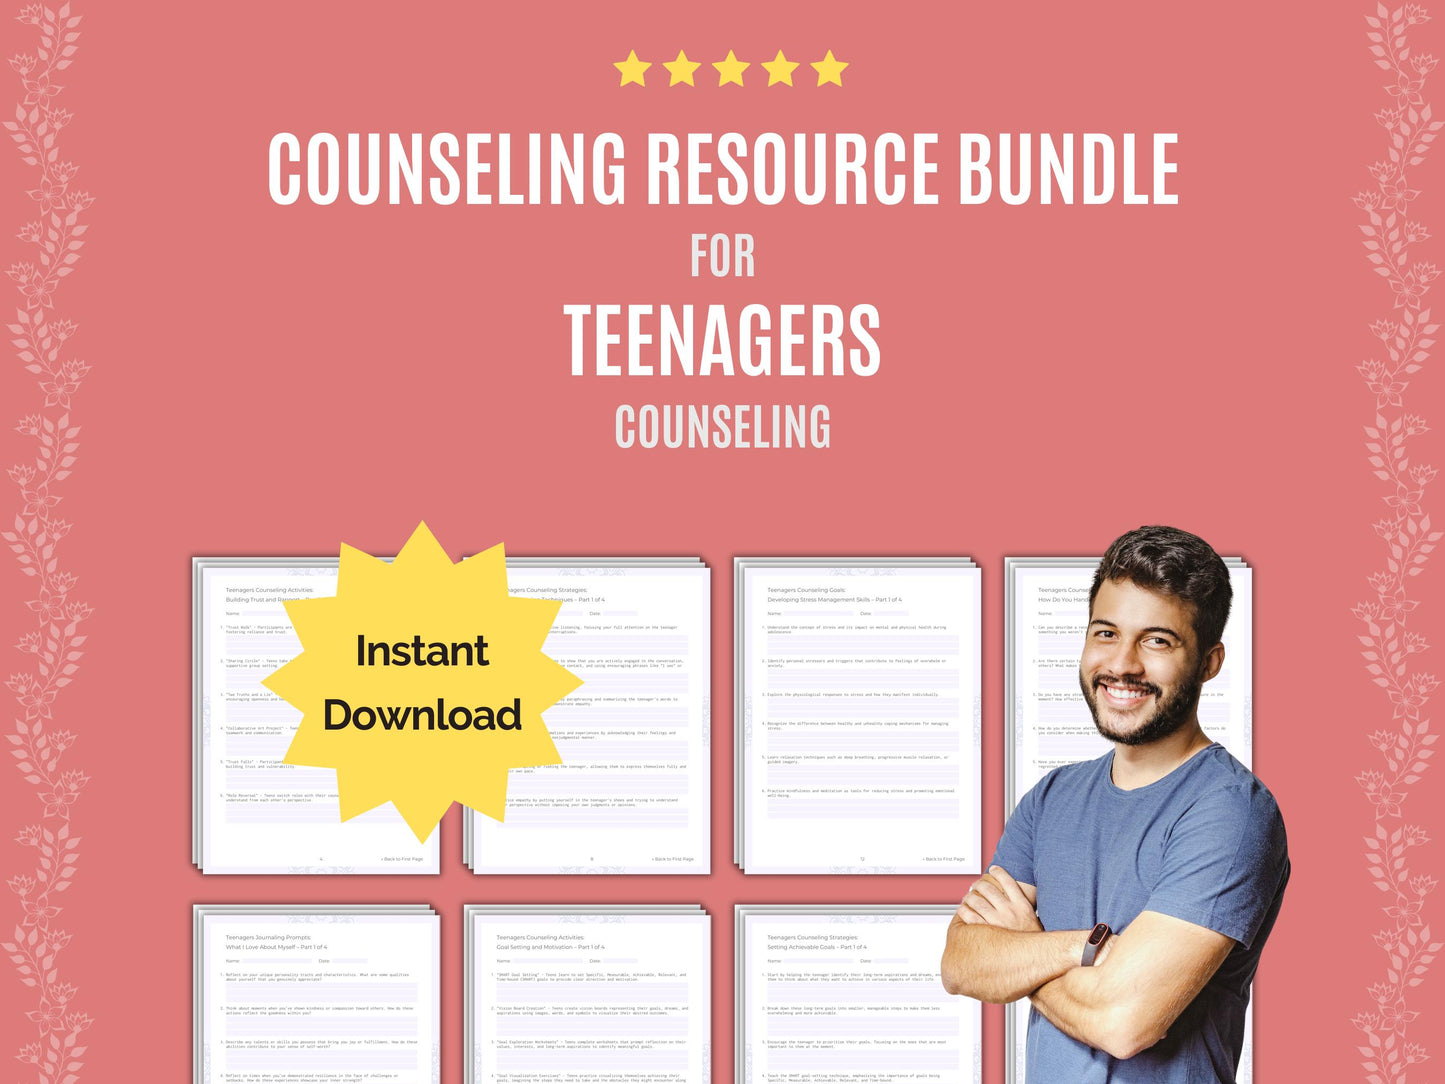 Teenagers Template, Counselor, Teenagers Workbook, Teenagers Therapy, Teenagers Resource, Mental Health, Teenagers Idea, Teenagers Worksheet, Teenagers Tool, Teenagers Bundle, Teenagers Content, Teenagers Counseling, Therapist